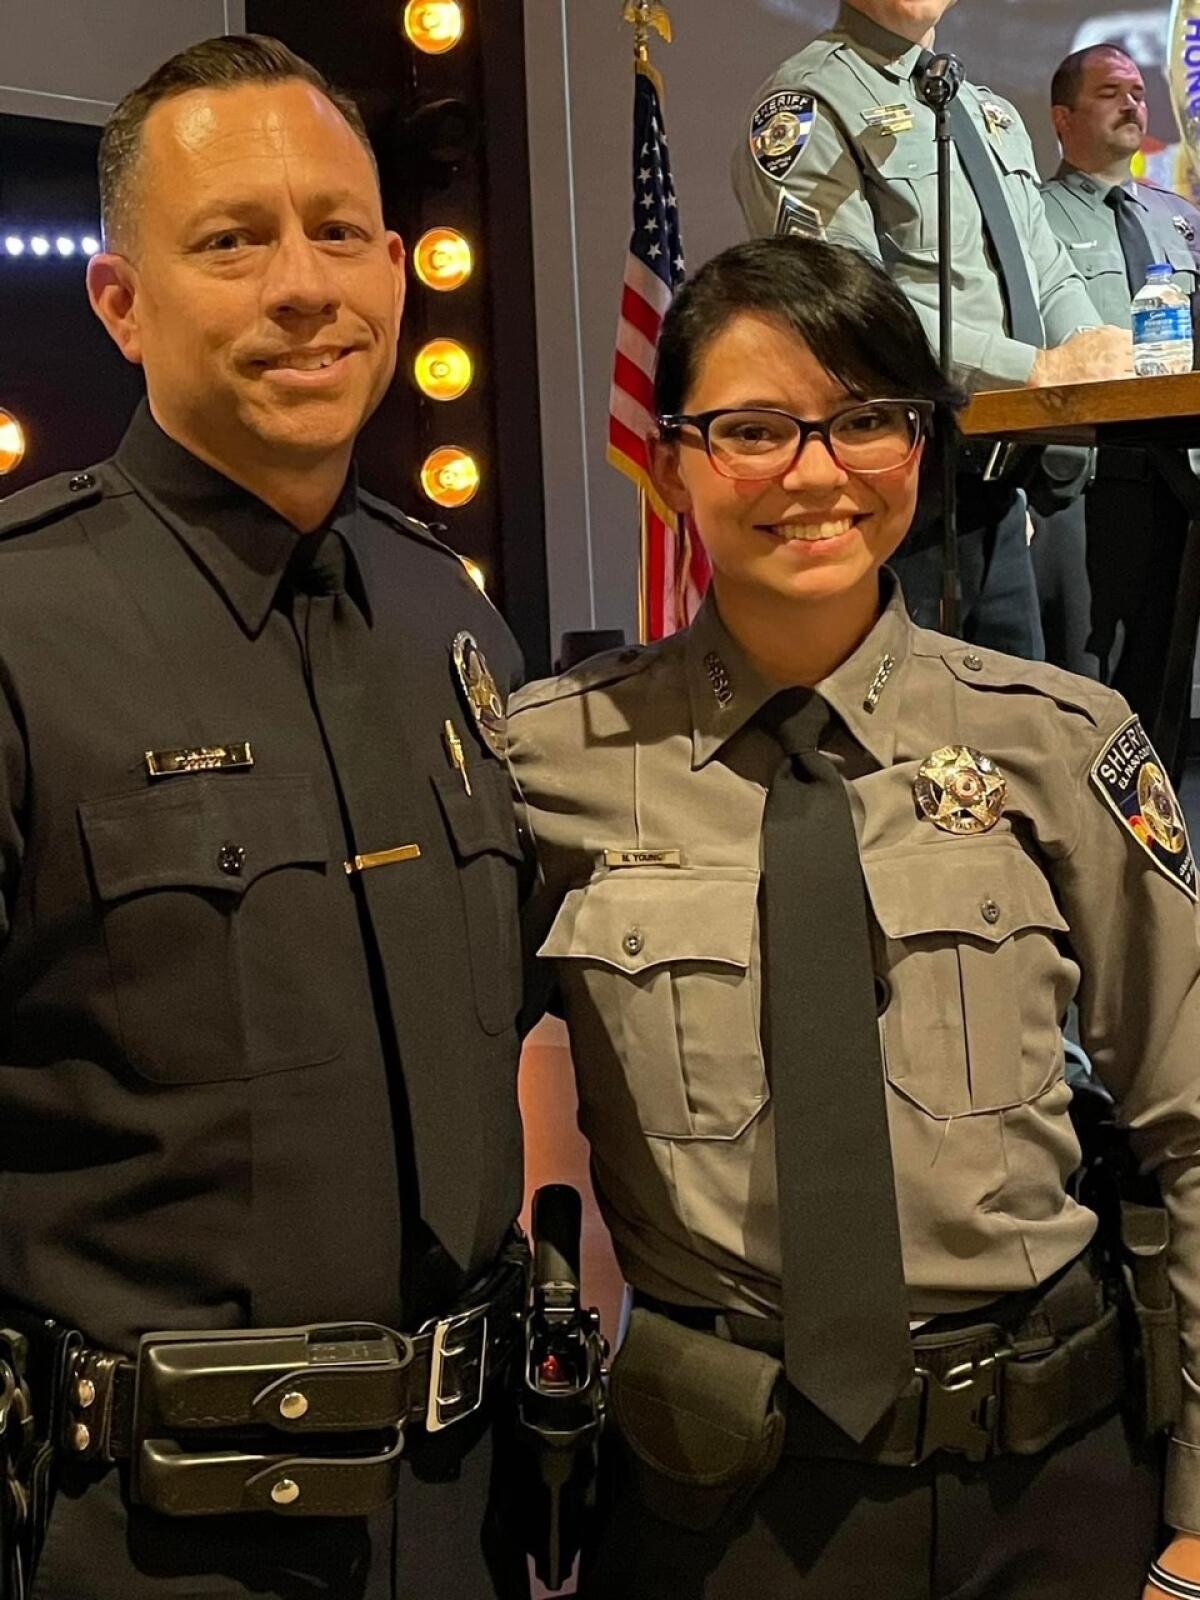 Escondido Police Sgt. Jeff Valdivia smiles with new El Paso County Sheriff's Deputy Natalie Young.